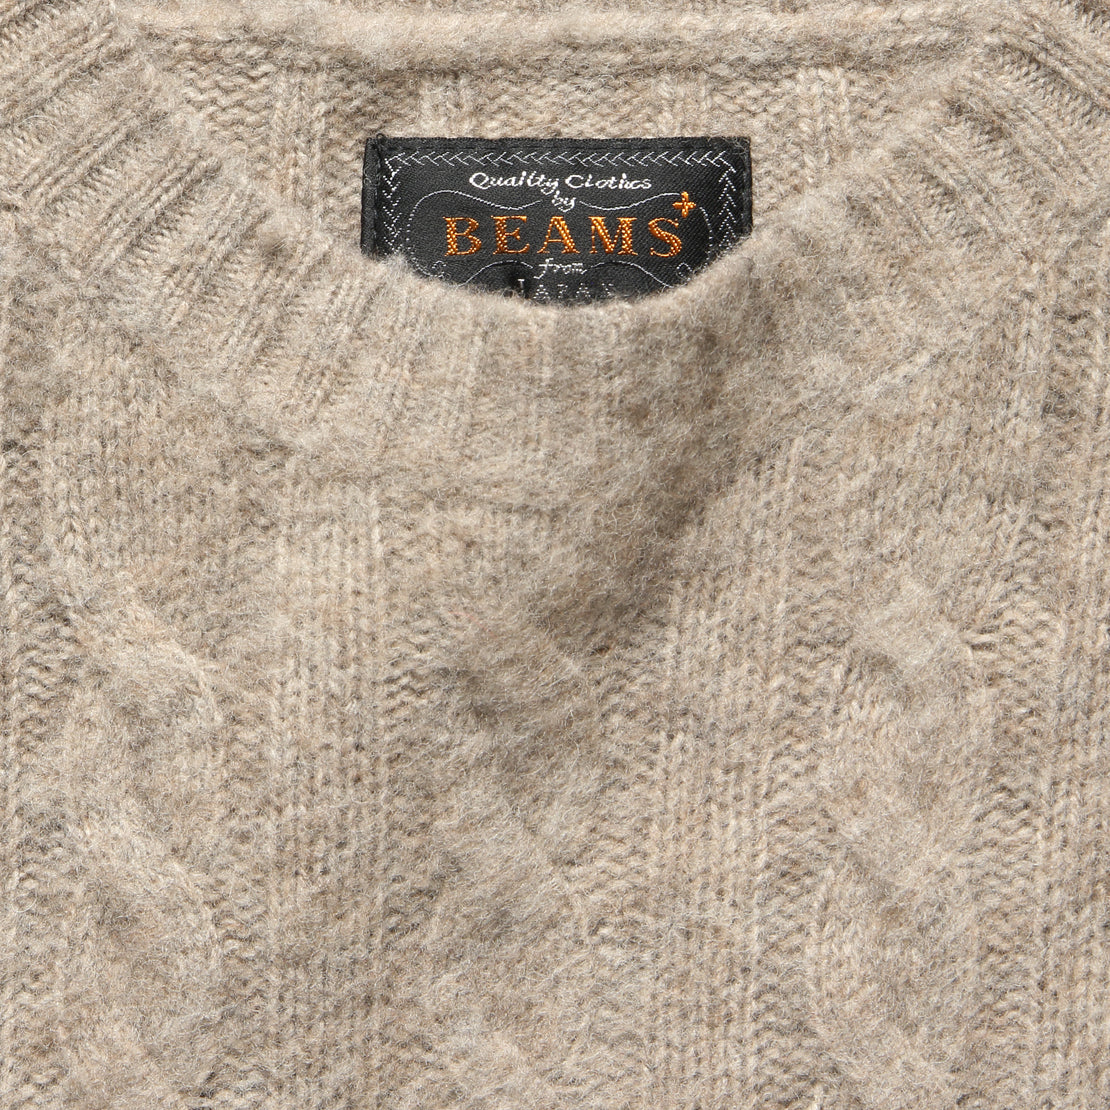 Shaggy Cable Crew Sweater - Taupe - BEAMS+ - STAG Provisions - Tops - Sweater